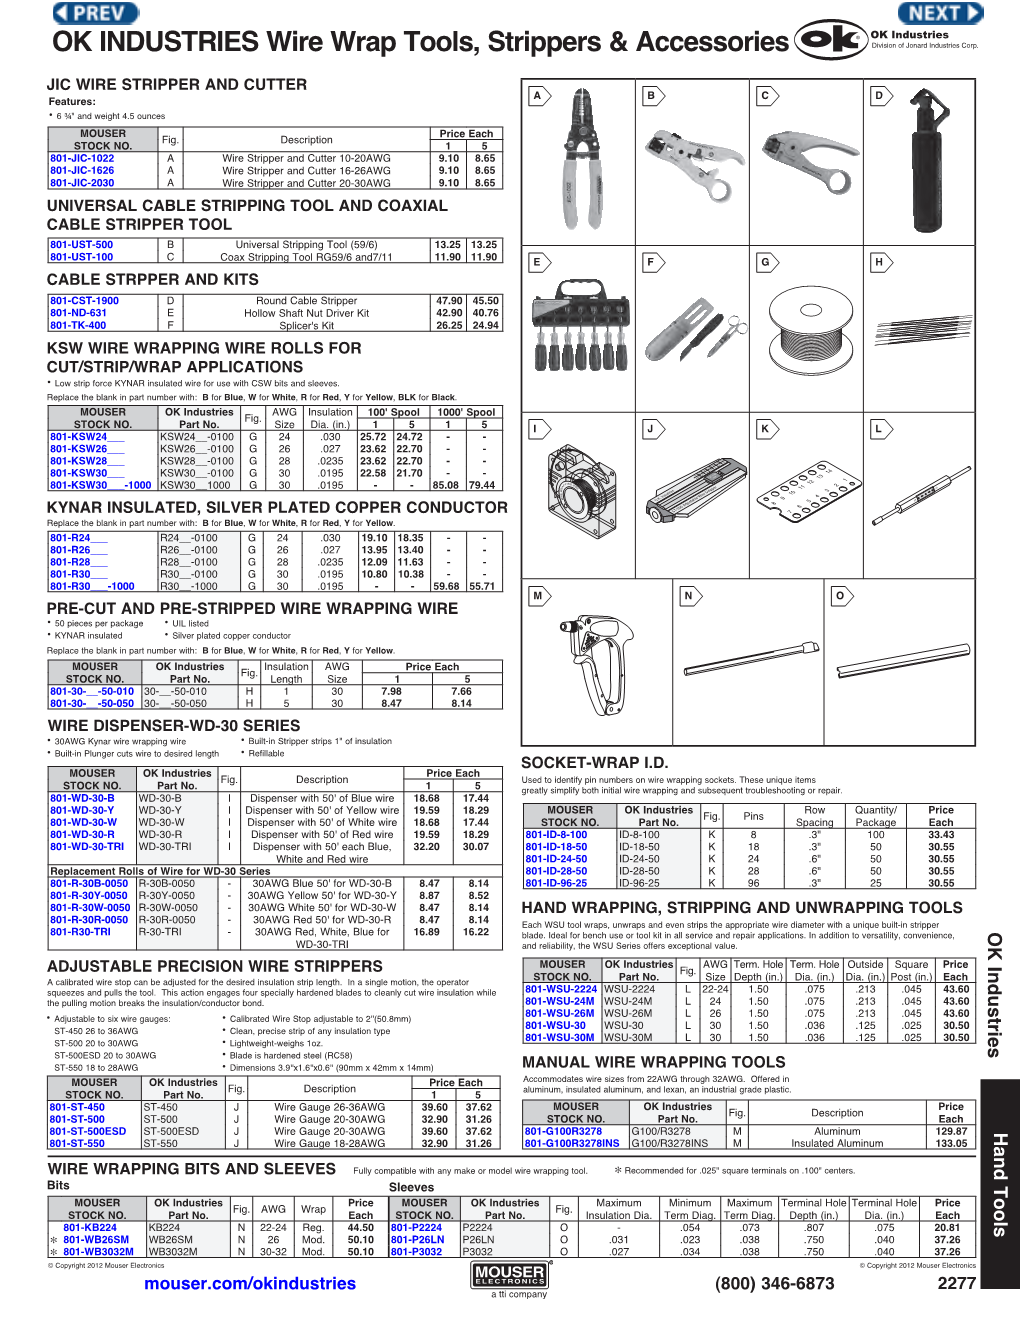 OK INDUSTRIES Wire Wrap Tools, Strippers & Accessories